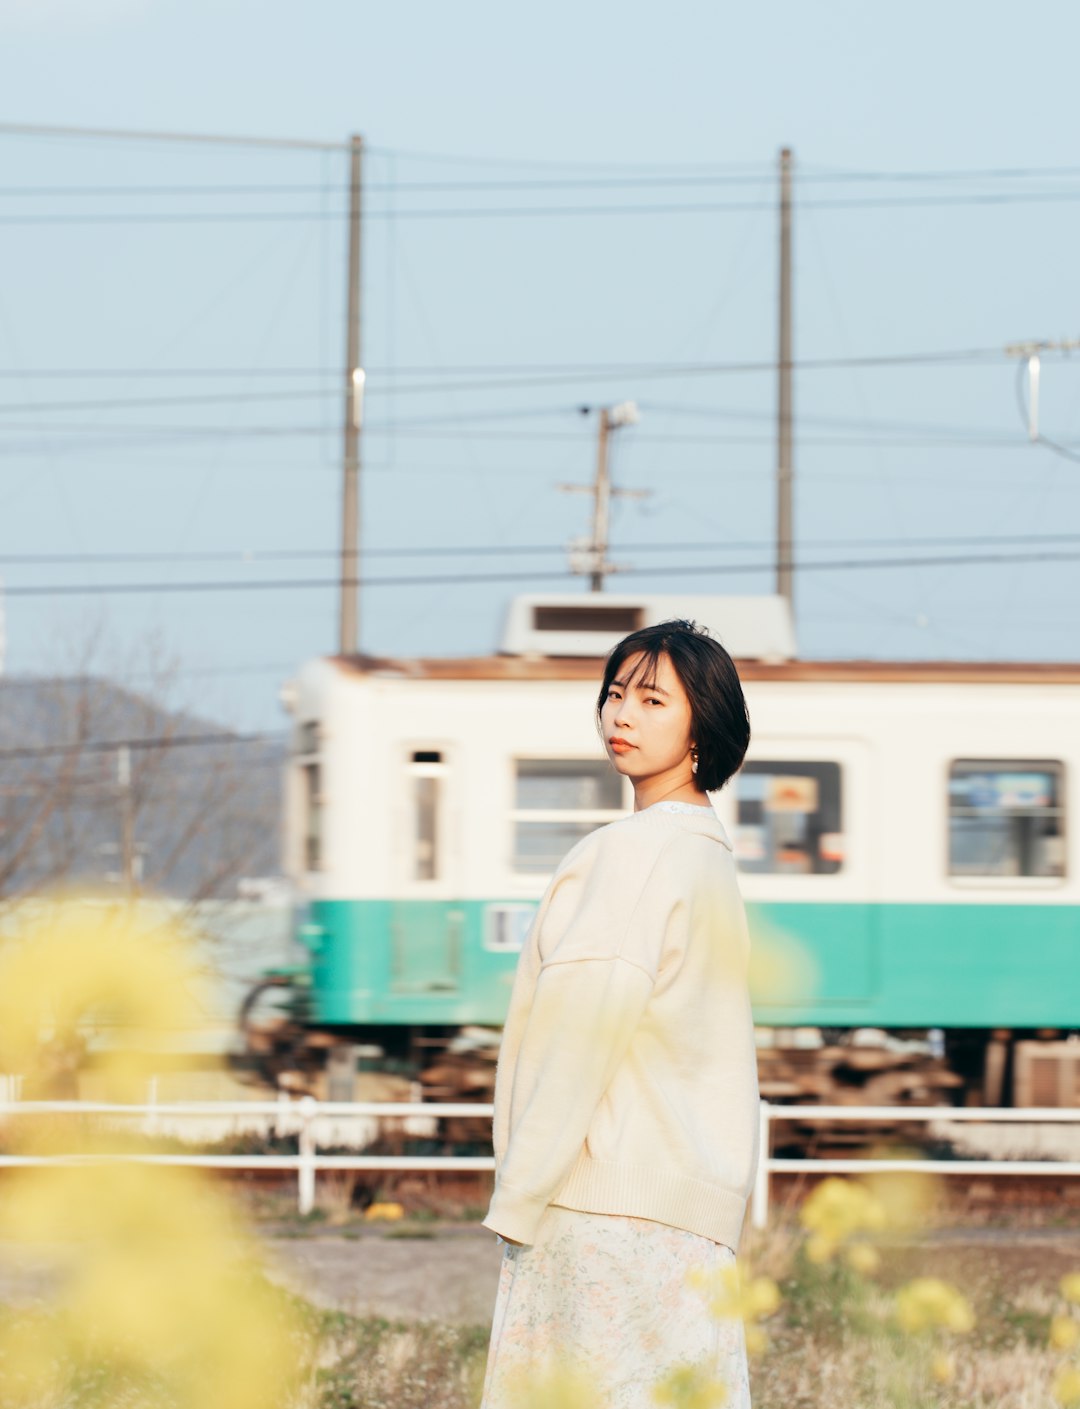 woman in white long sleeve shirt standing near train during daytime